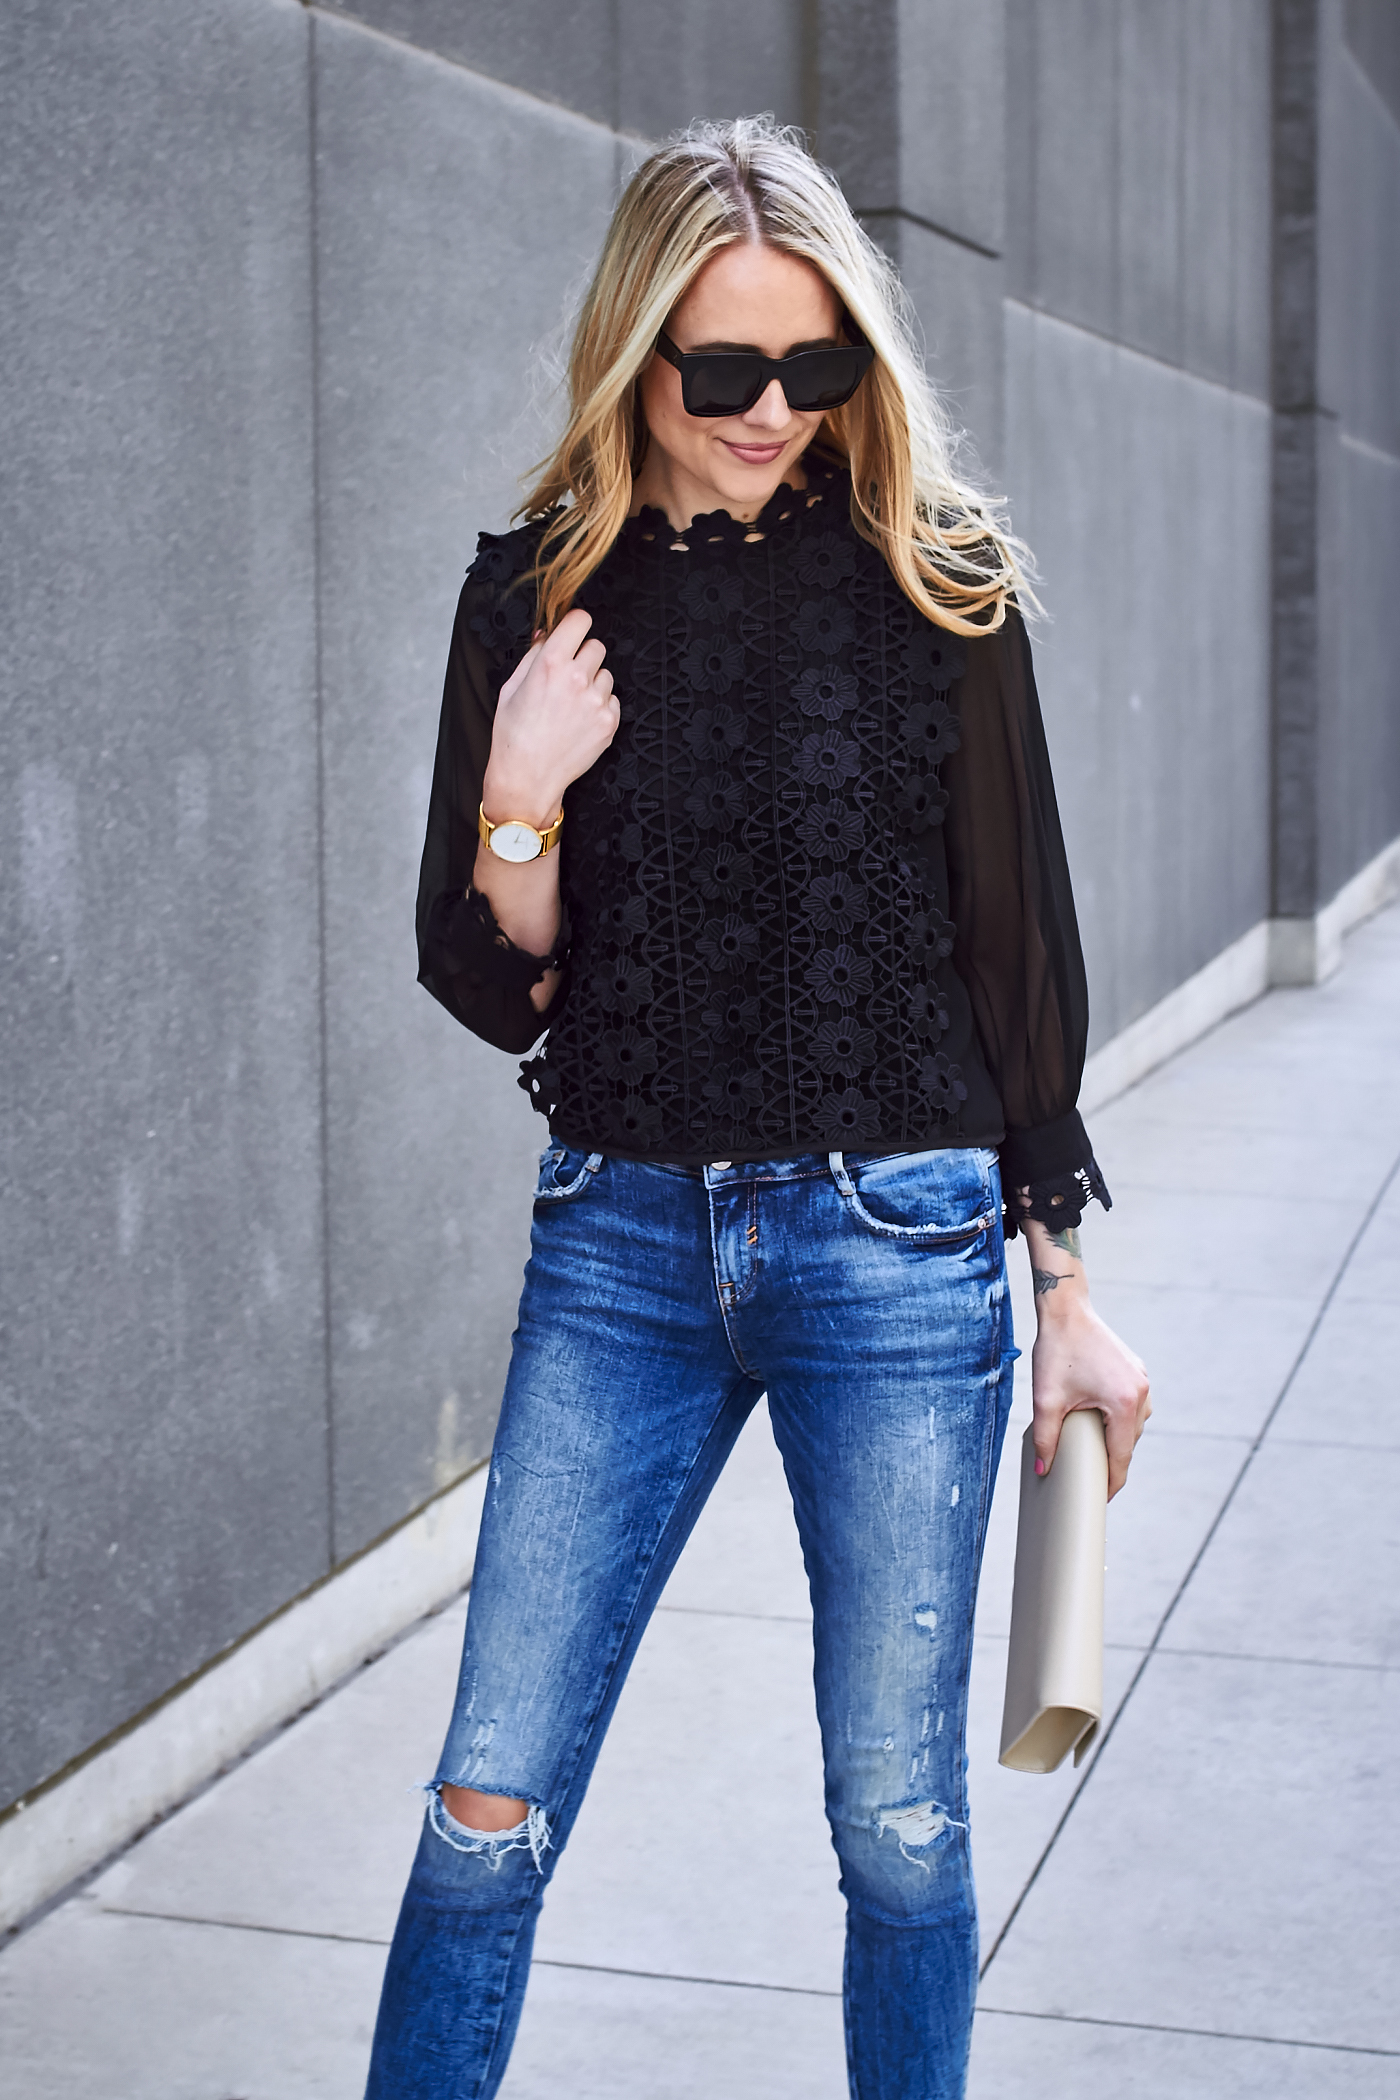 Chicwish Black Lace Top, Zara Destructed Skinny Jeans, Black Tassel Heels, Saint Laurent Monogram Clutch, Fall Outfit, Date Night Outfit